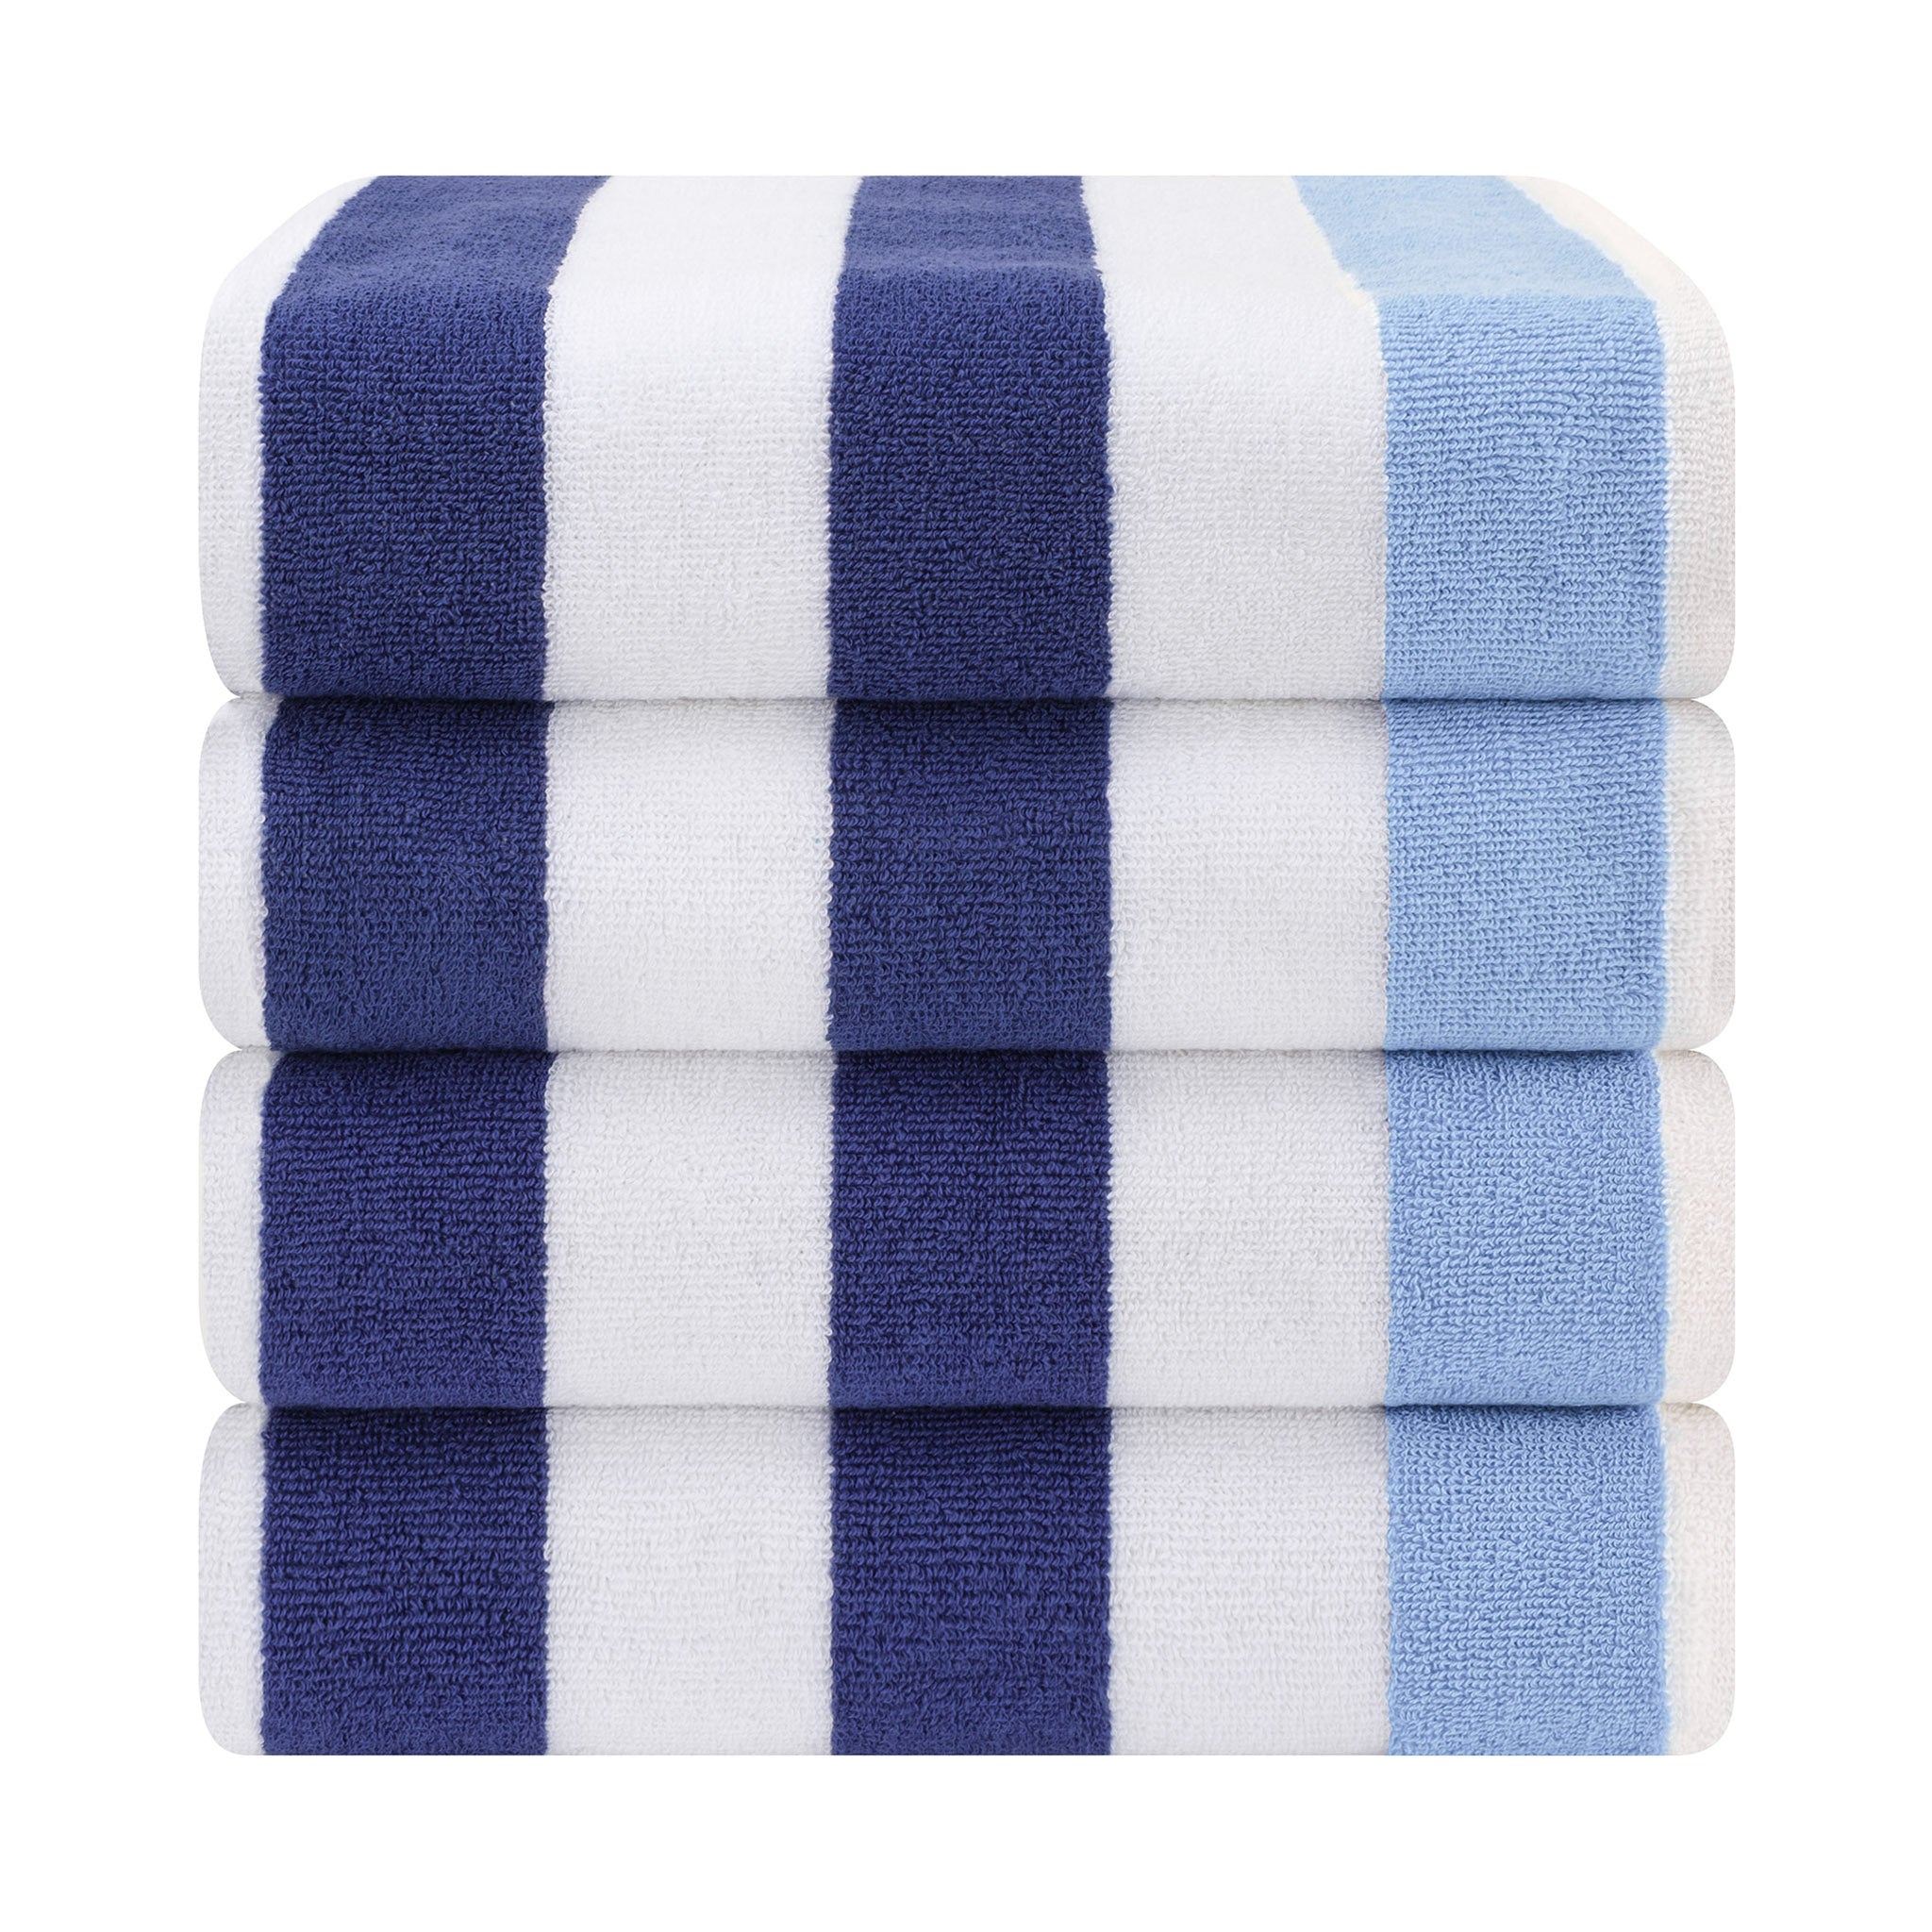 American Soft Linen 100% Cotton 4 Pack Beach Towels Cabana Striped Pool Towels -navy-sky-2